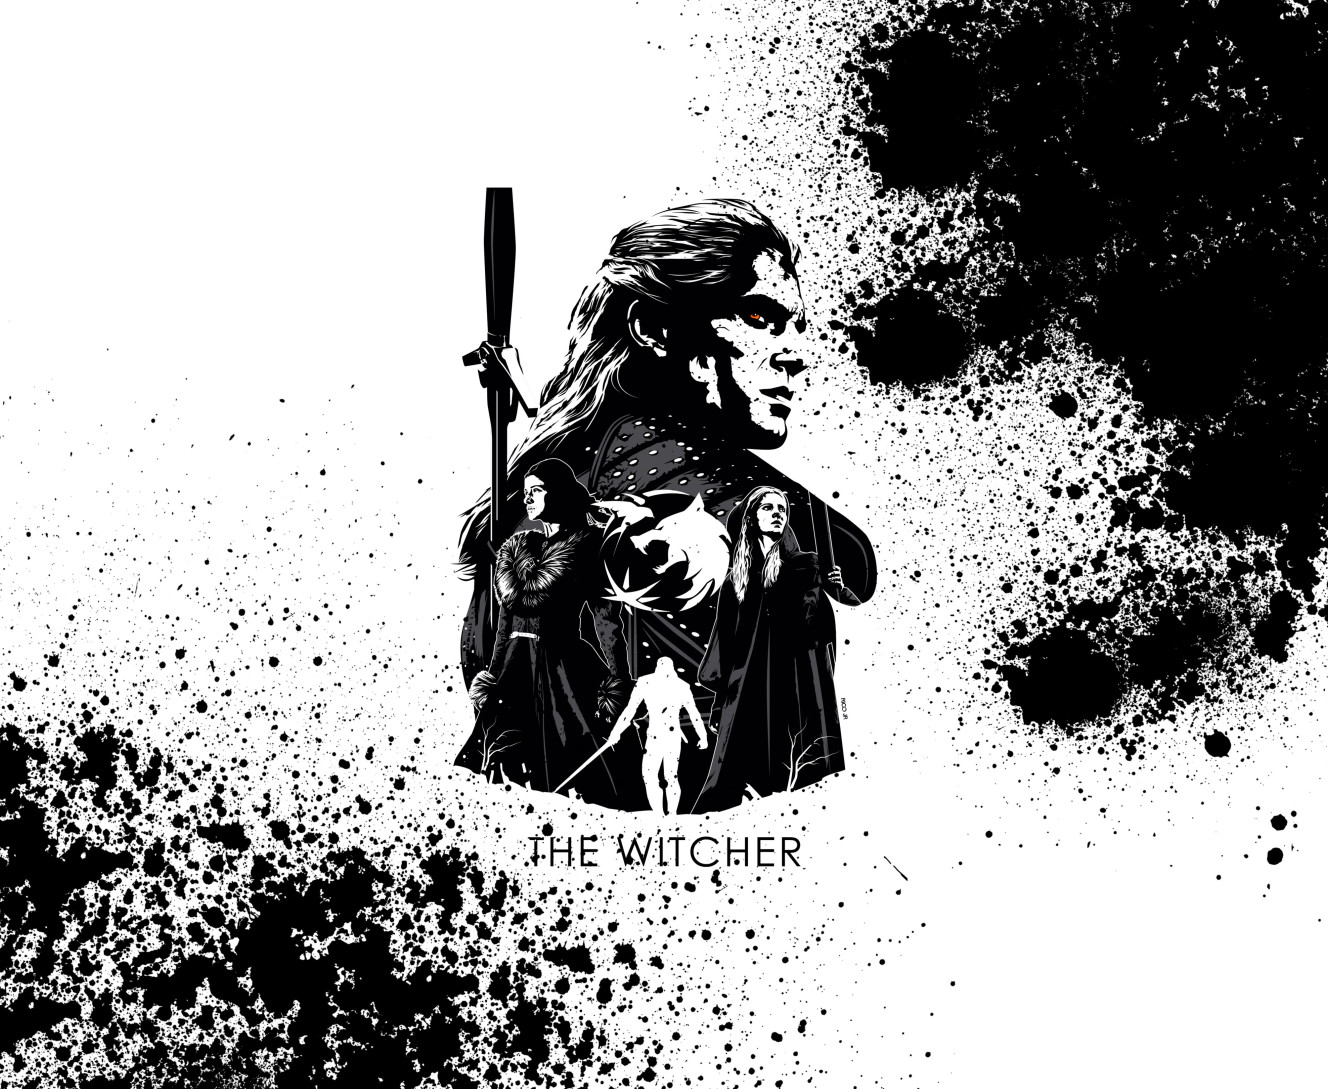 THE WITCHER [27]